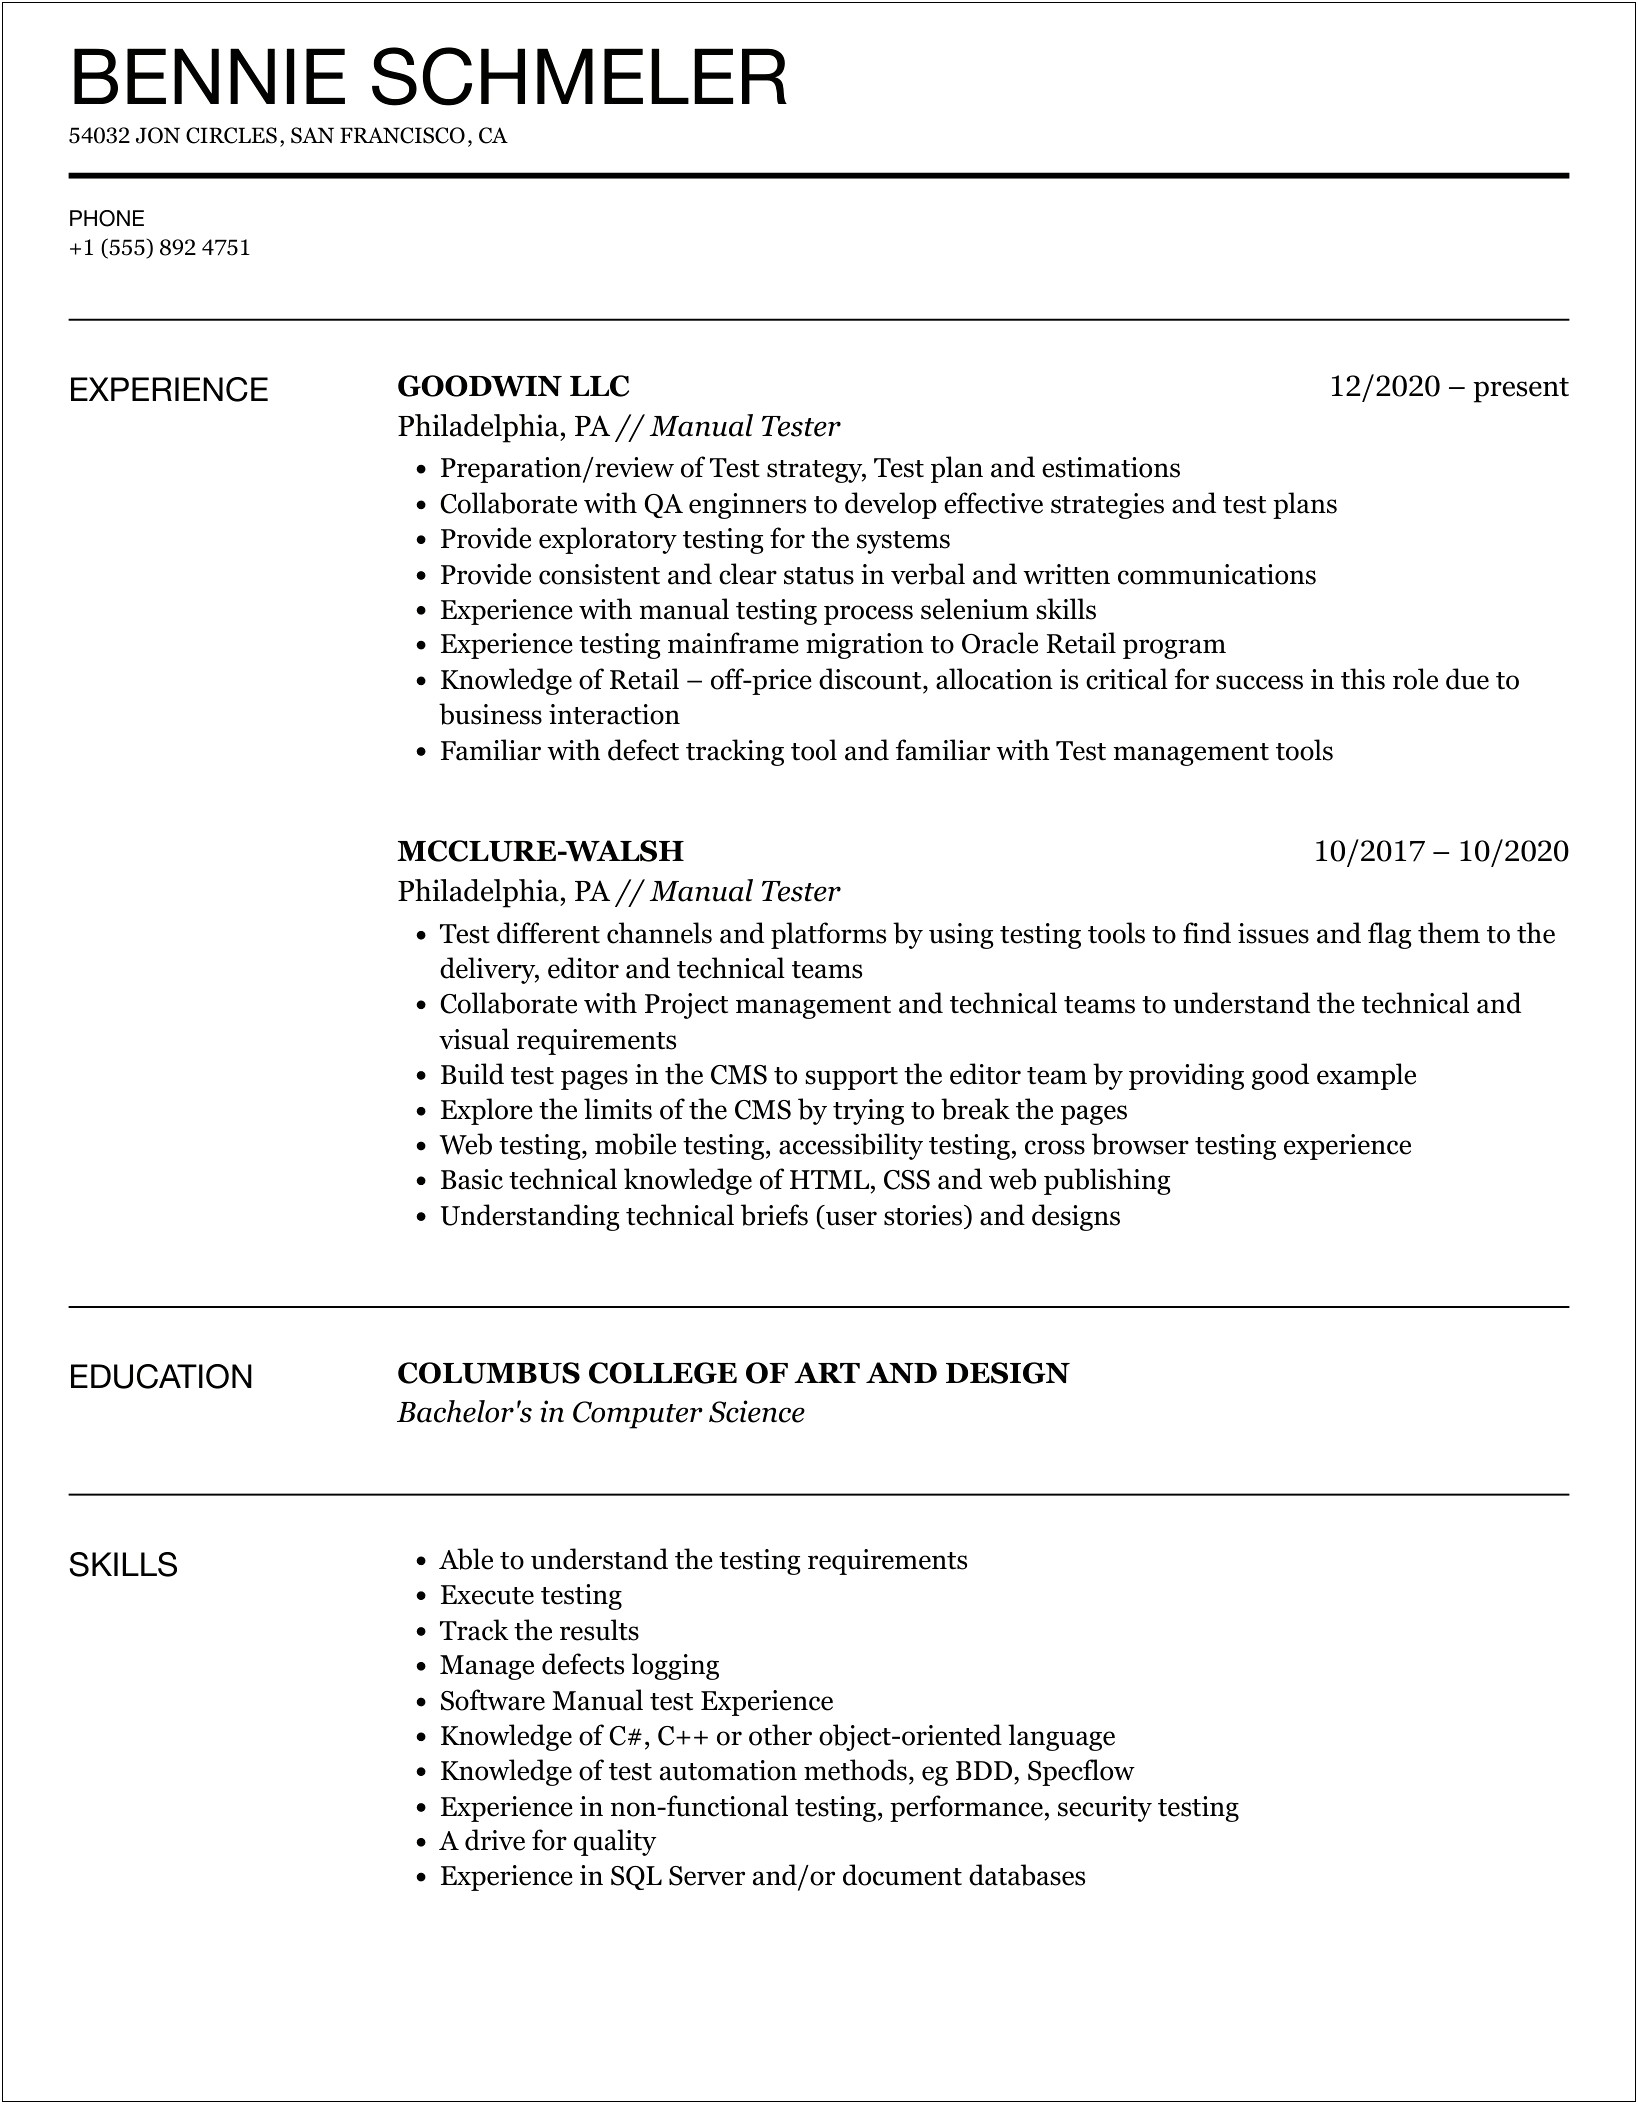 Best Manual Testing Resume For Experience